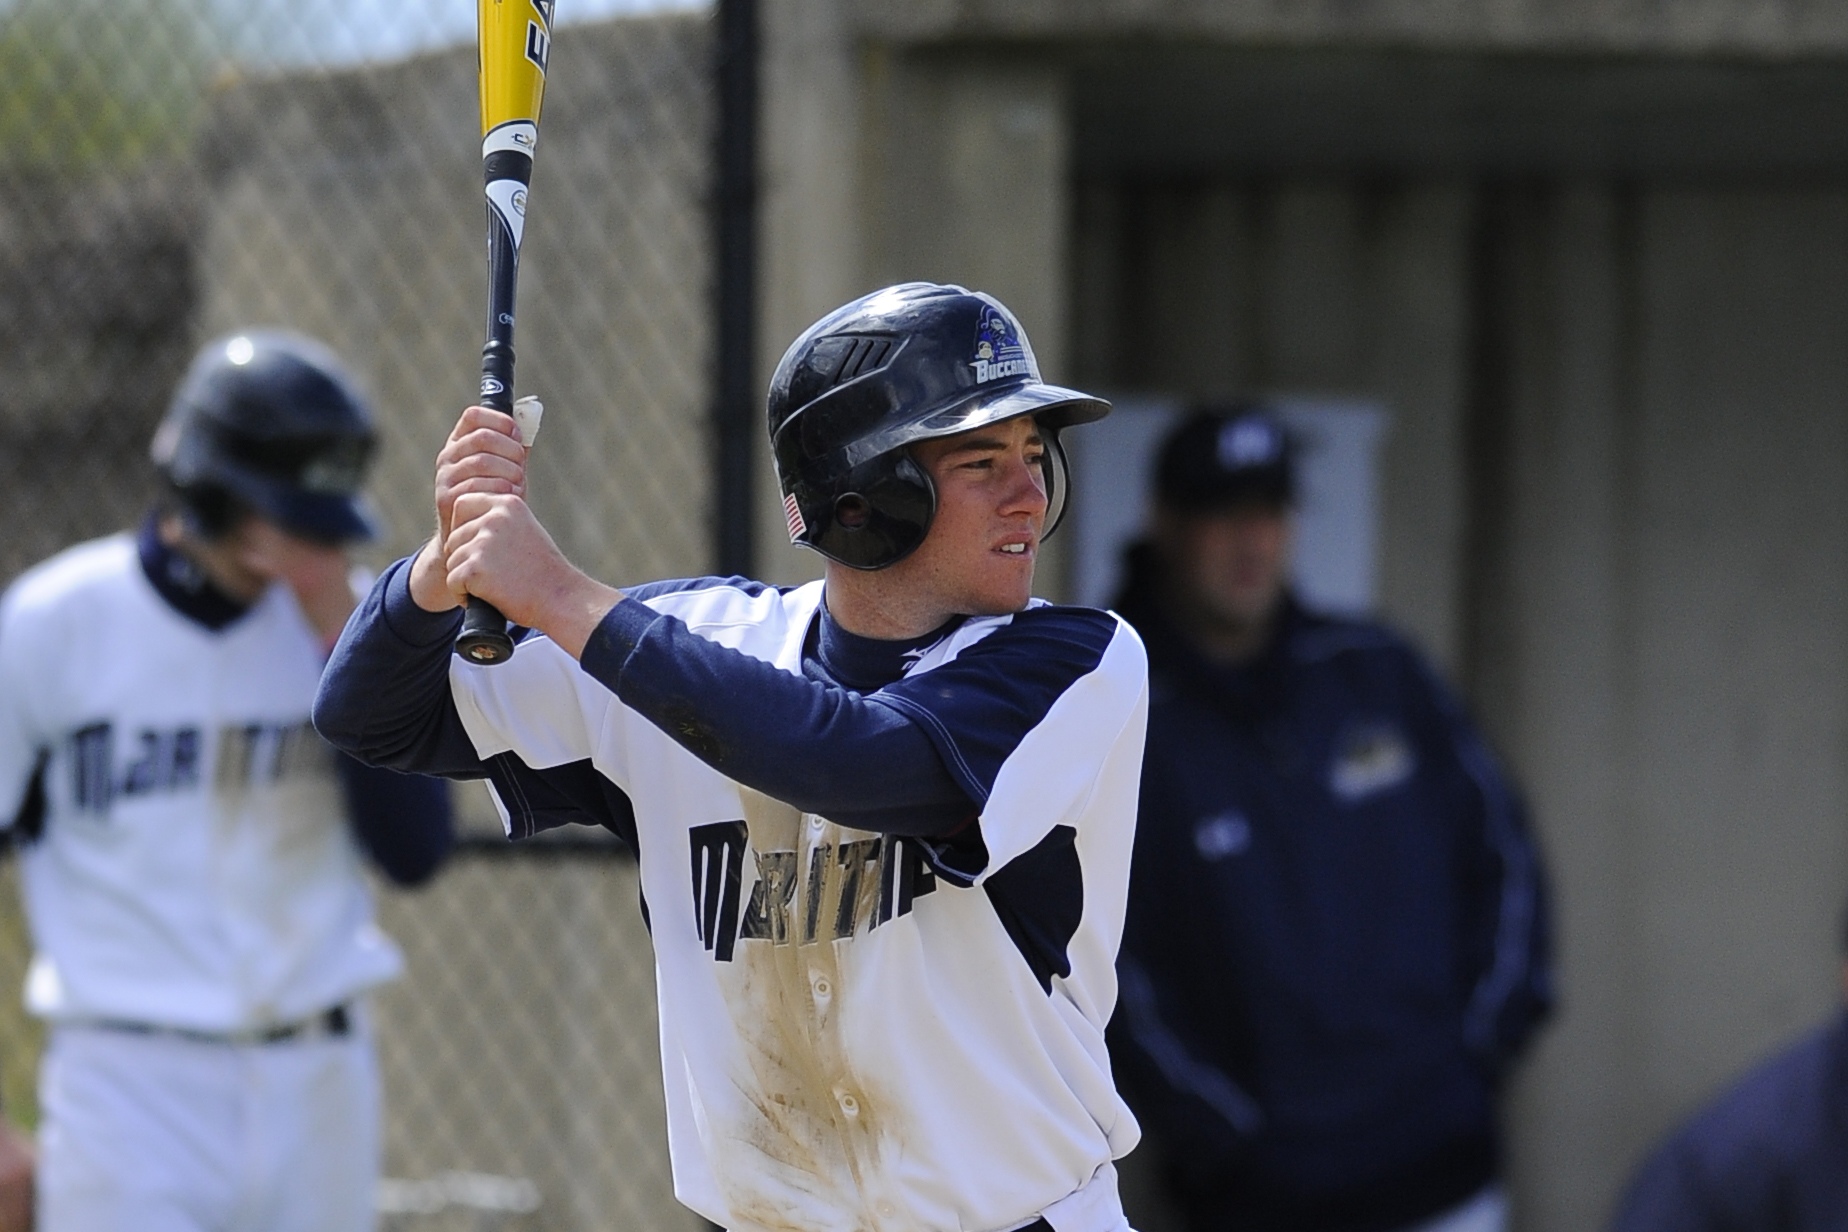 Genereux Shines At Plate, On Mound As Baseball Opens Corradi's 39th Season With 14-11 Non-League Setback To Cornell (Iowa)